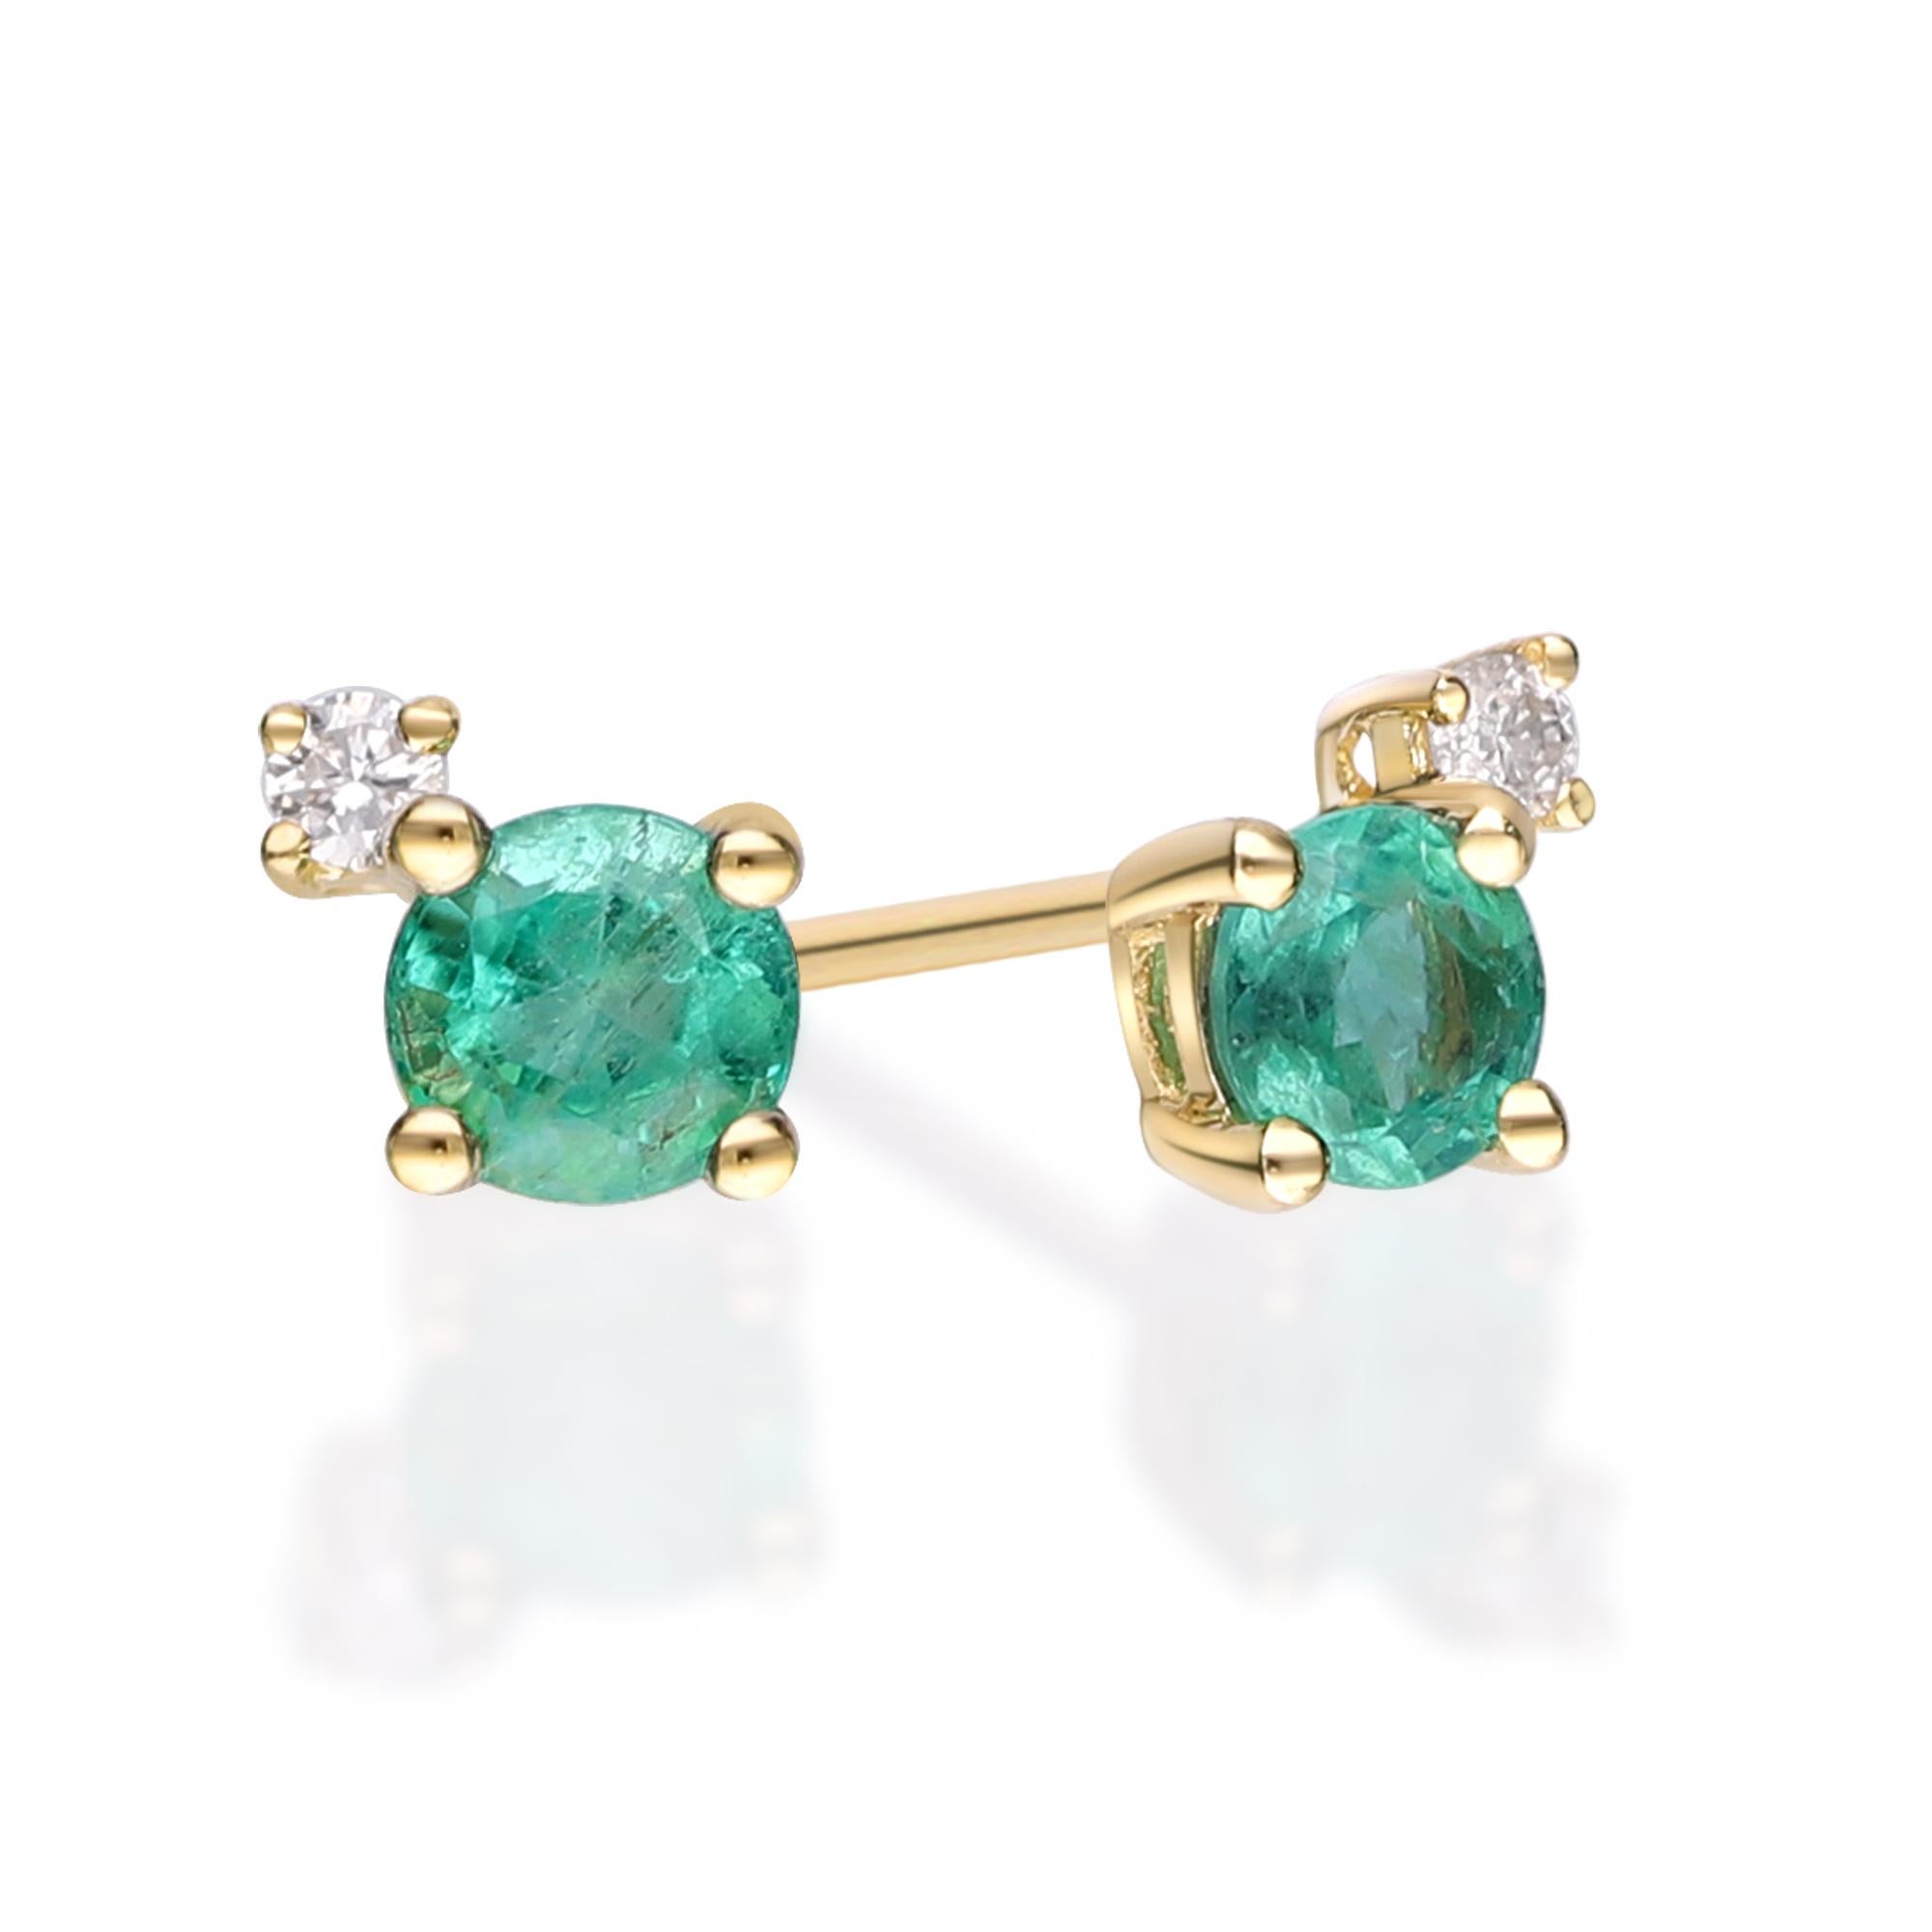 Decorate yourself in elegance with this Earring is crafted from 10-karat Yellow Gold by Gin & Grace. This Earring is made up of 4.0 mm Round-Cut Zambian Emerald (2 pcs) 0.52 carat and Round-cut Diamond (2 pcs) 0.04 Carat. This Earring is weight 0.82